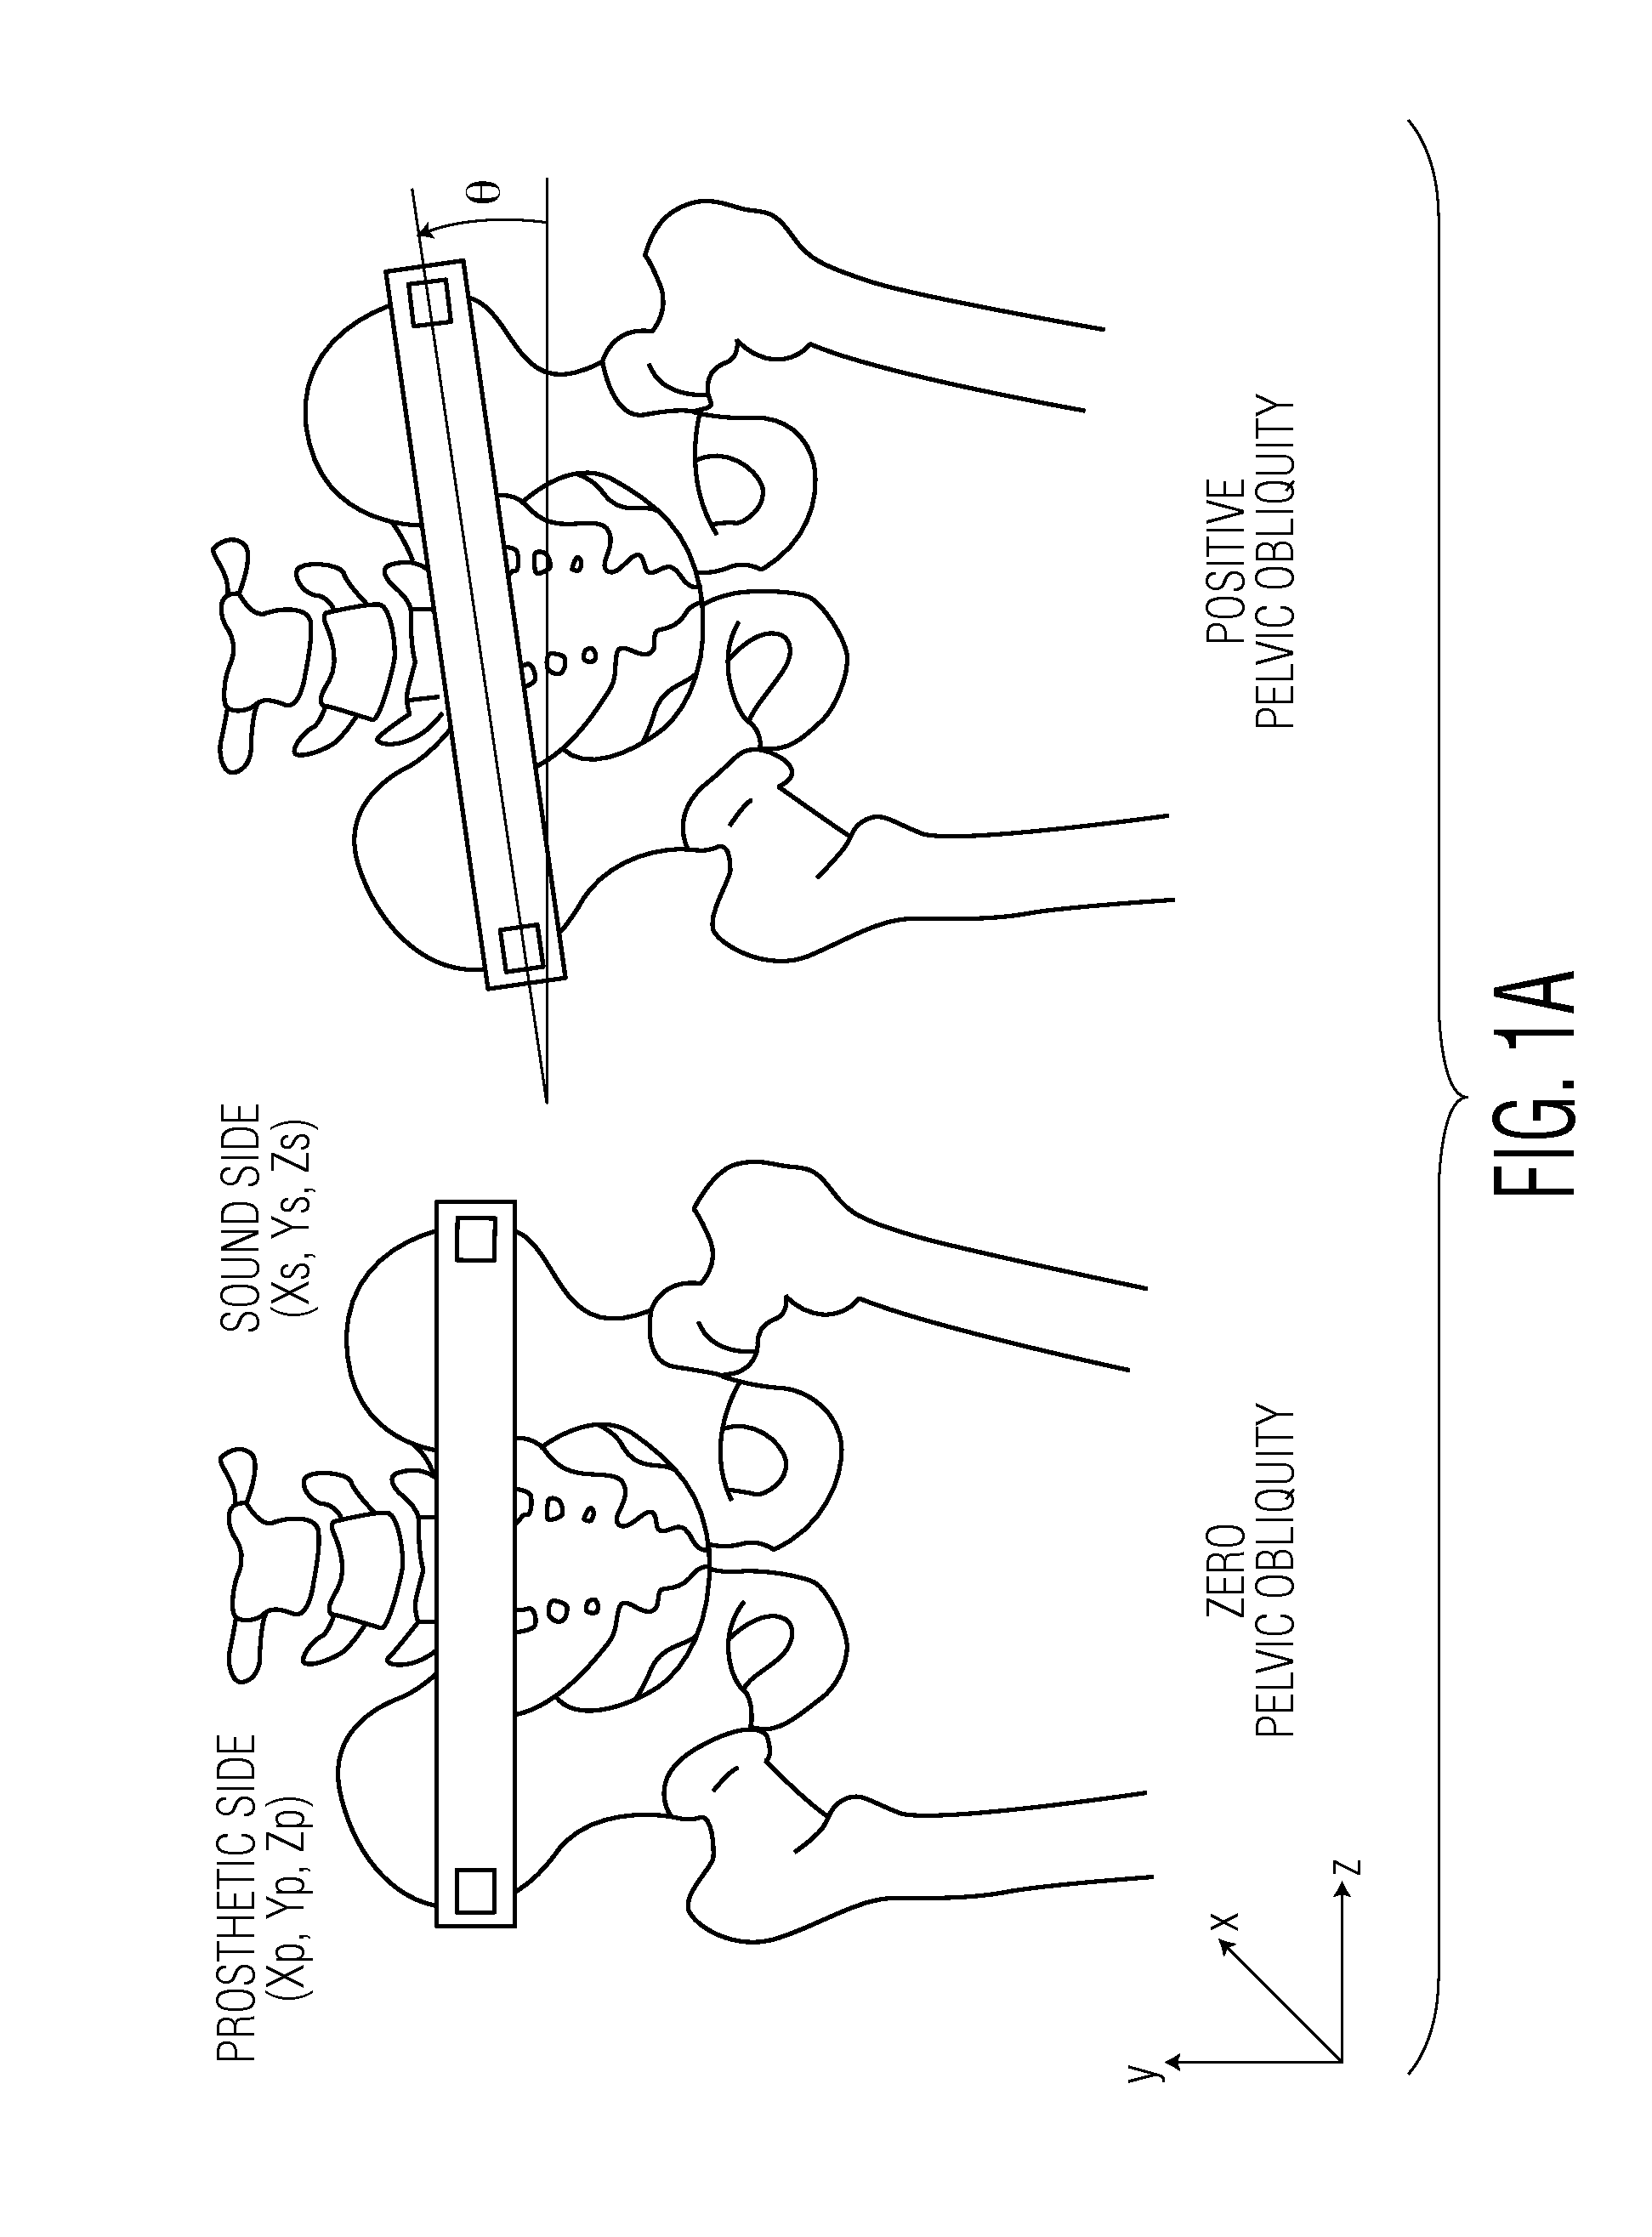 Method for aligning an acetabular cup